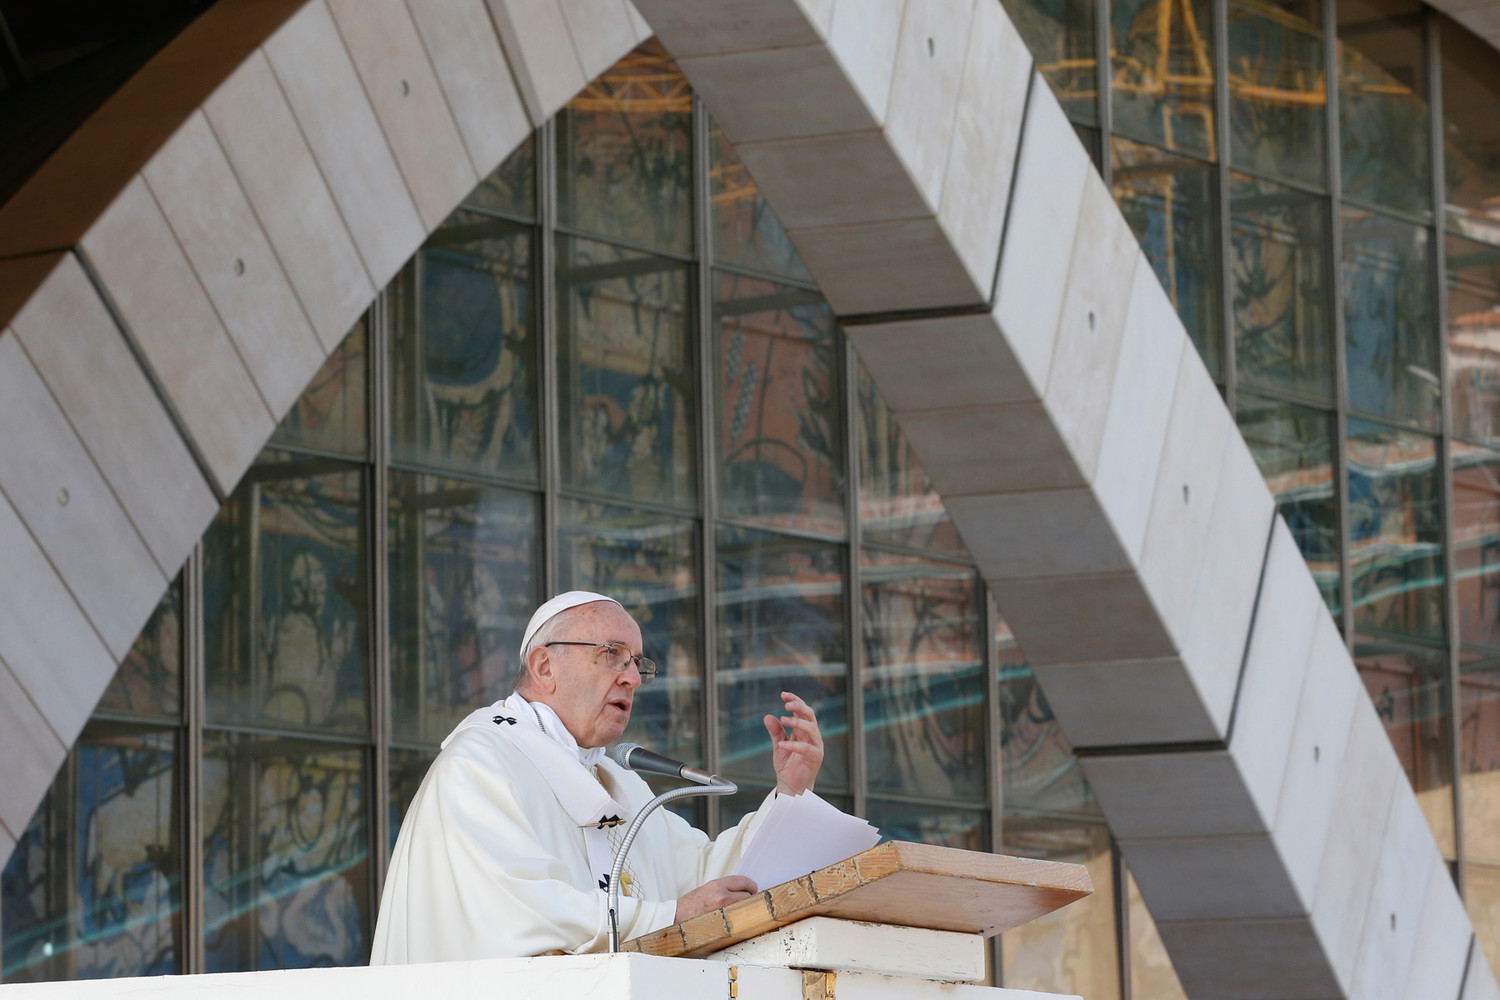 Pope Francis gives the homily as he celebrates Mass at the Shrine of St. Pio of Pietrelcina in San Giovanni Rotondo, Italy, March 17.